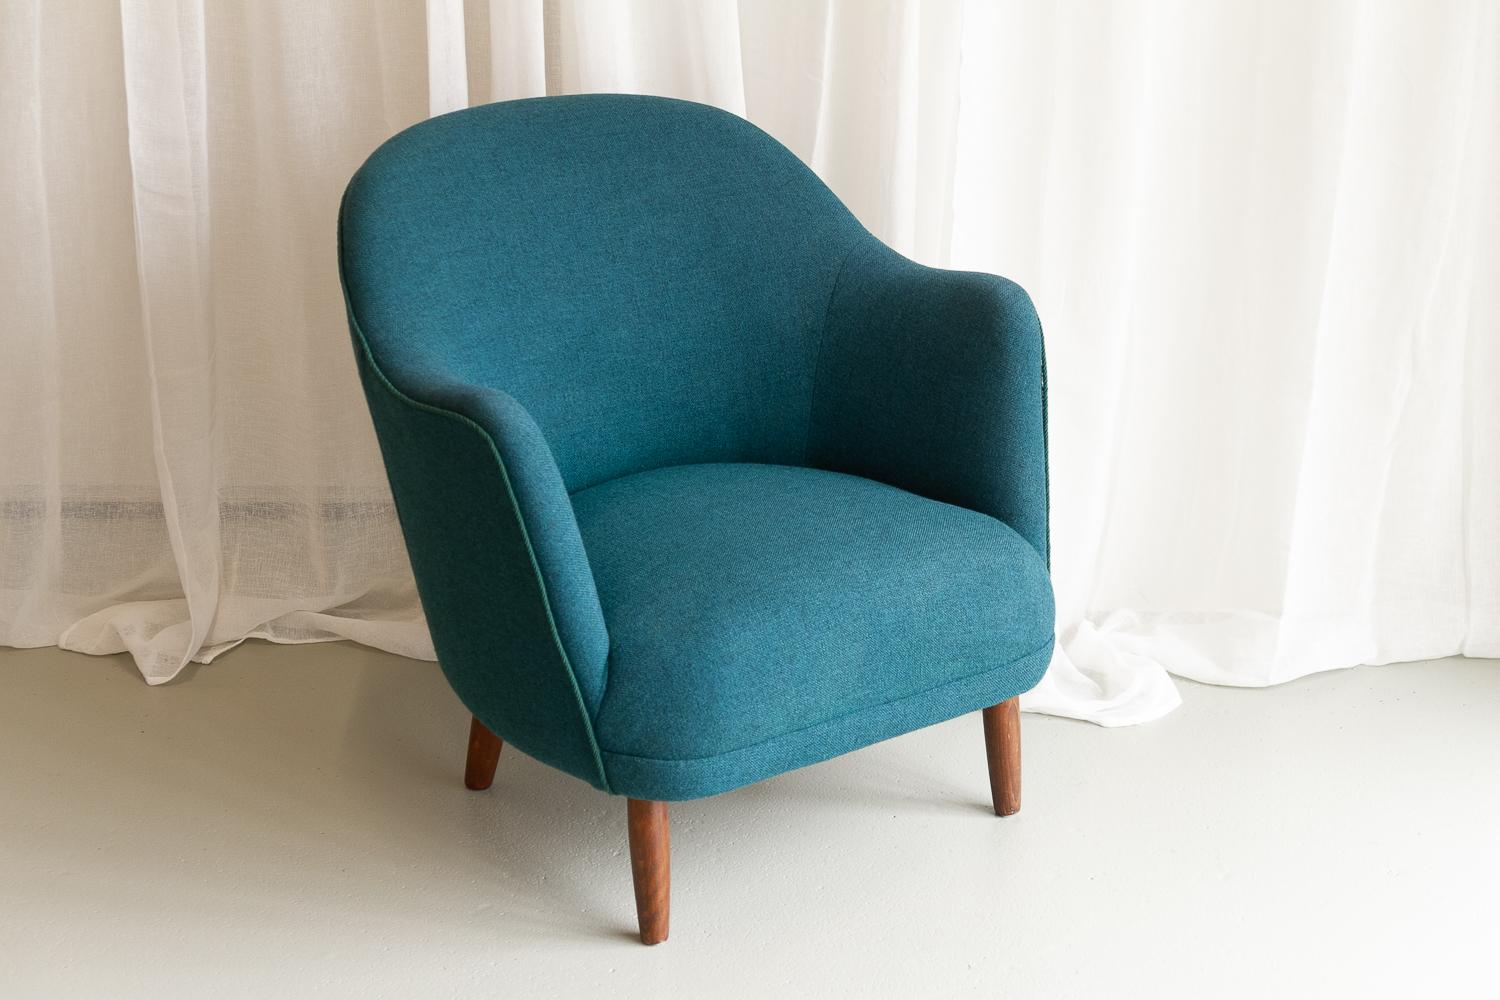 Danish Modern Easy Chair in Teal Blue, 1950s.

Elegant Scandinavian Mid-Century Modern lounge chair in wool fabric and sleek round tapered stained beech legs. Made by Danish master carpenter in Denmark in the 1950s.
Beautiful round and organic shape